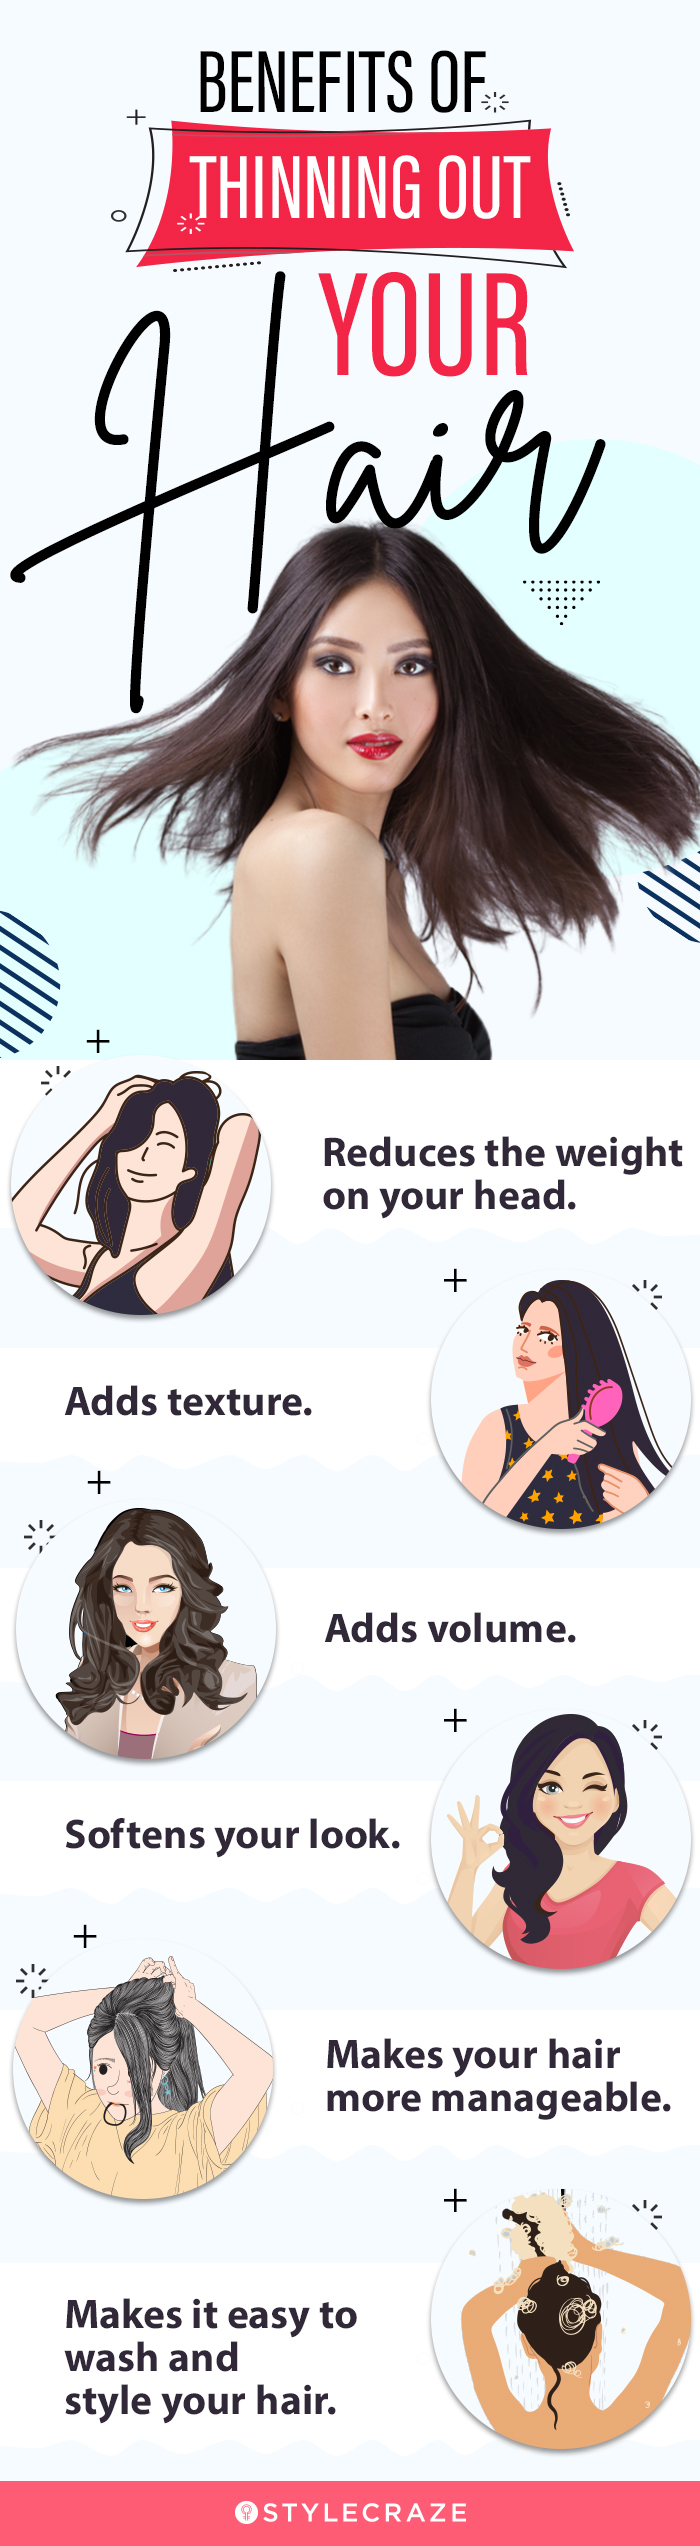 benefits of thinning out your hair [infographic]